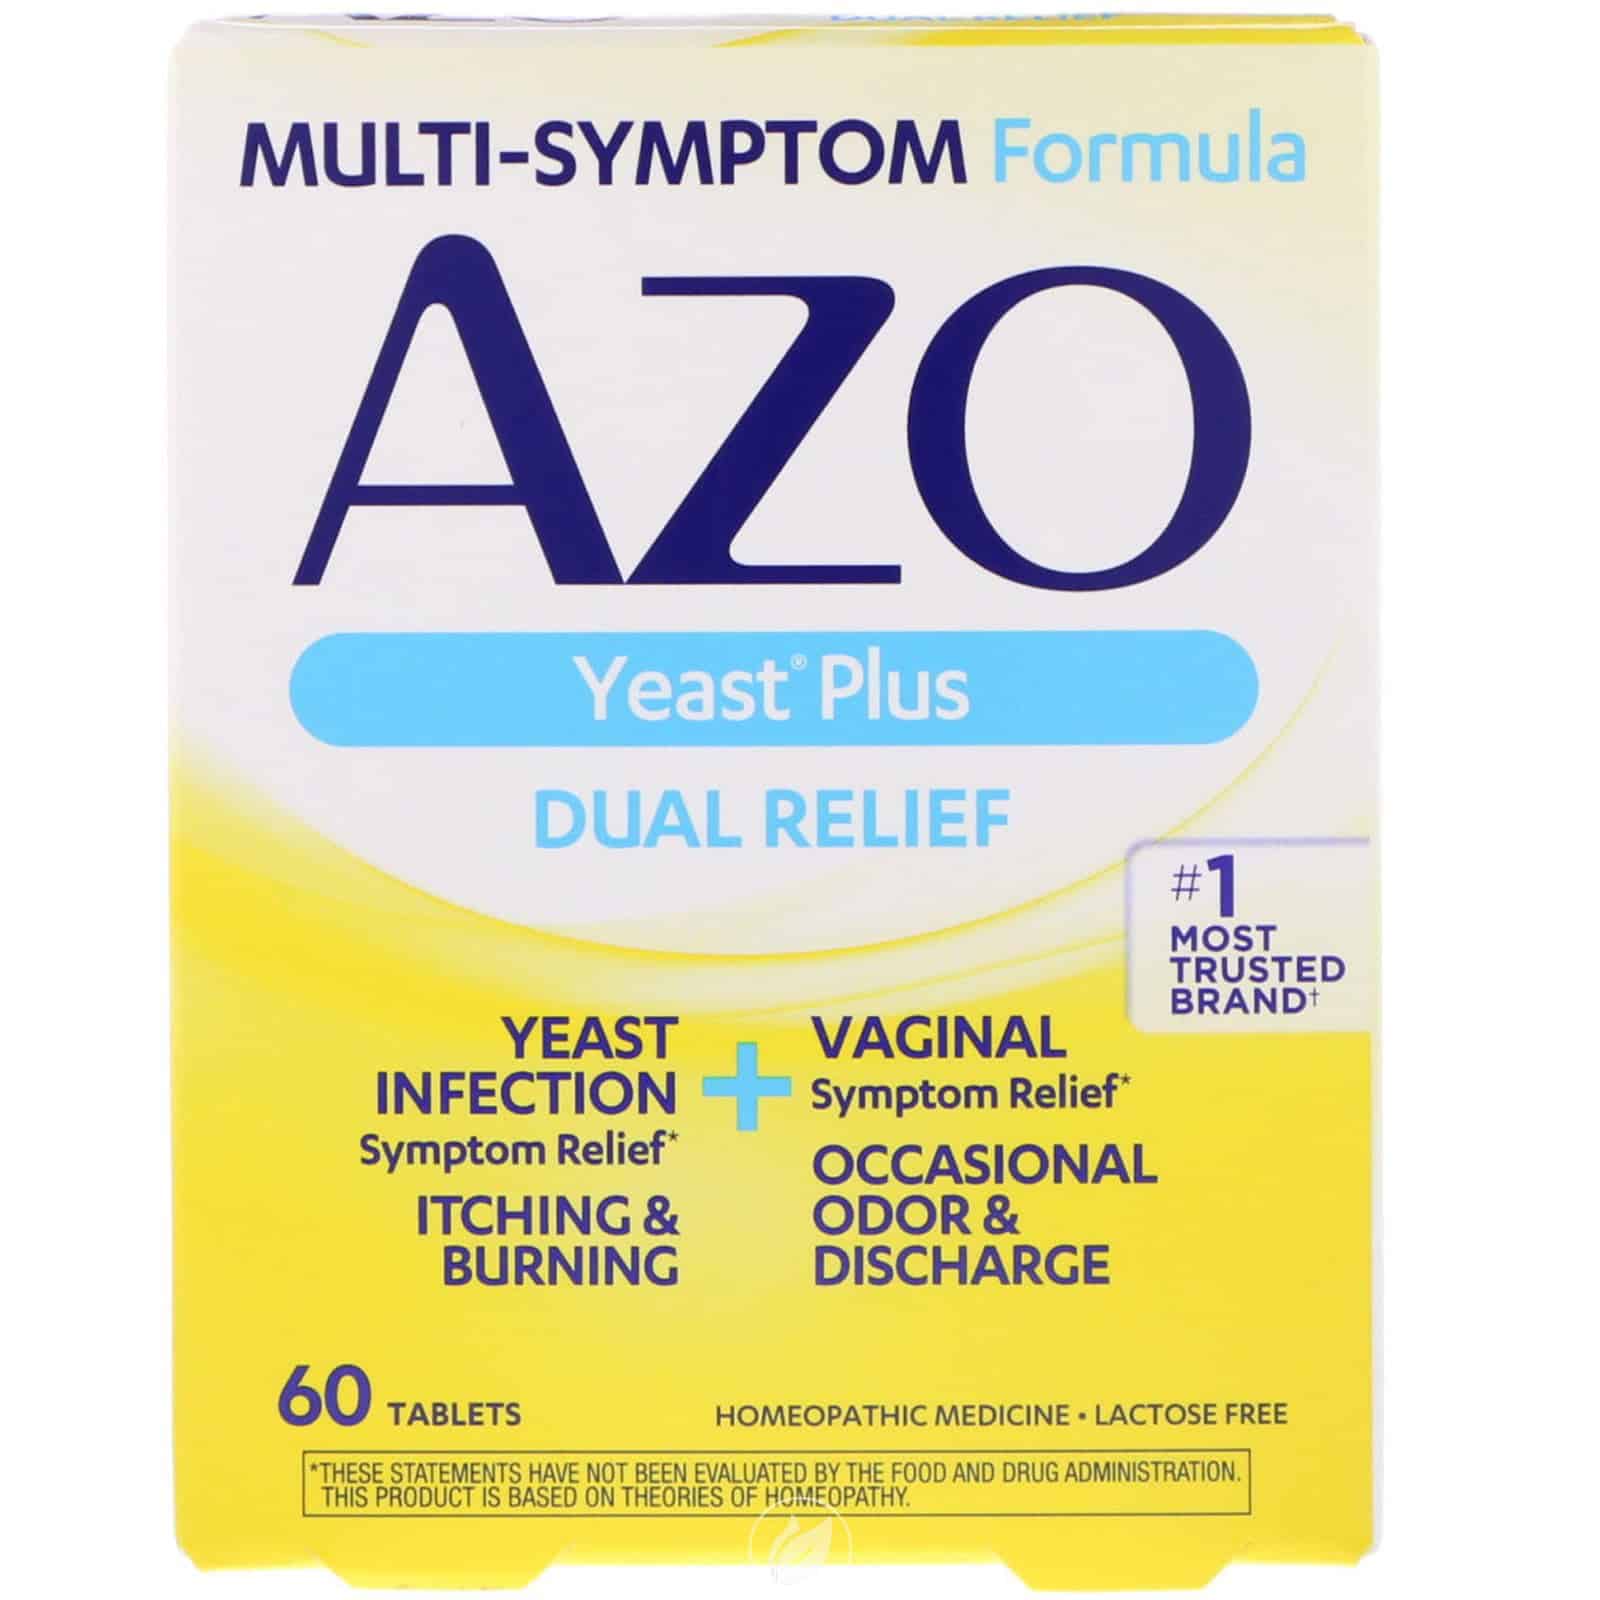 AZO Yeast Plus Dual Relief, Yeast Infection + Vaginal Symptom Relief ...